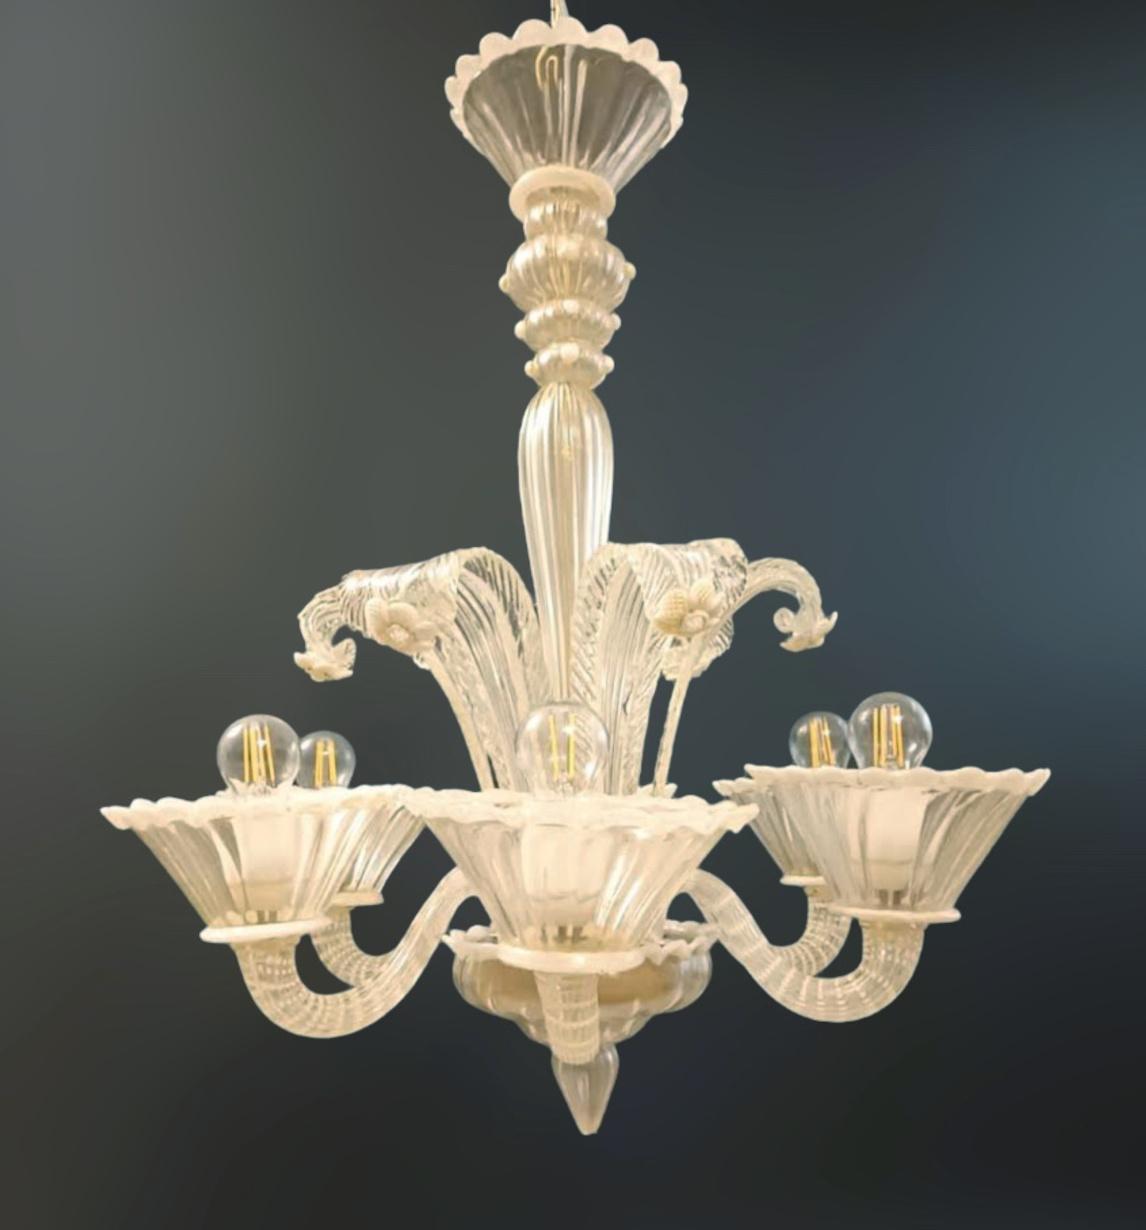 Vintage Italian chandelier with clear Murano glass infused with gold flecks and flowers in pâte de verre / Made in Italy, circa 1960s
Measures: Diameter 22 inches, height 34.5 inches
6 lights / E26 or E27 type / max 60W each
Order reference #: